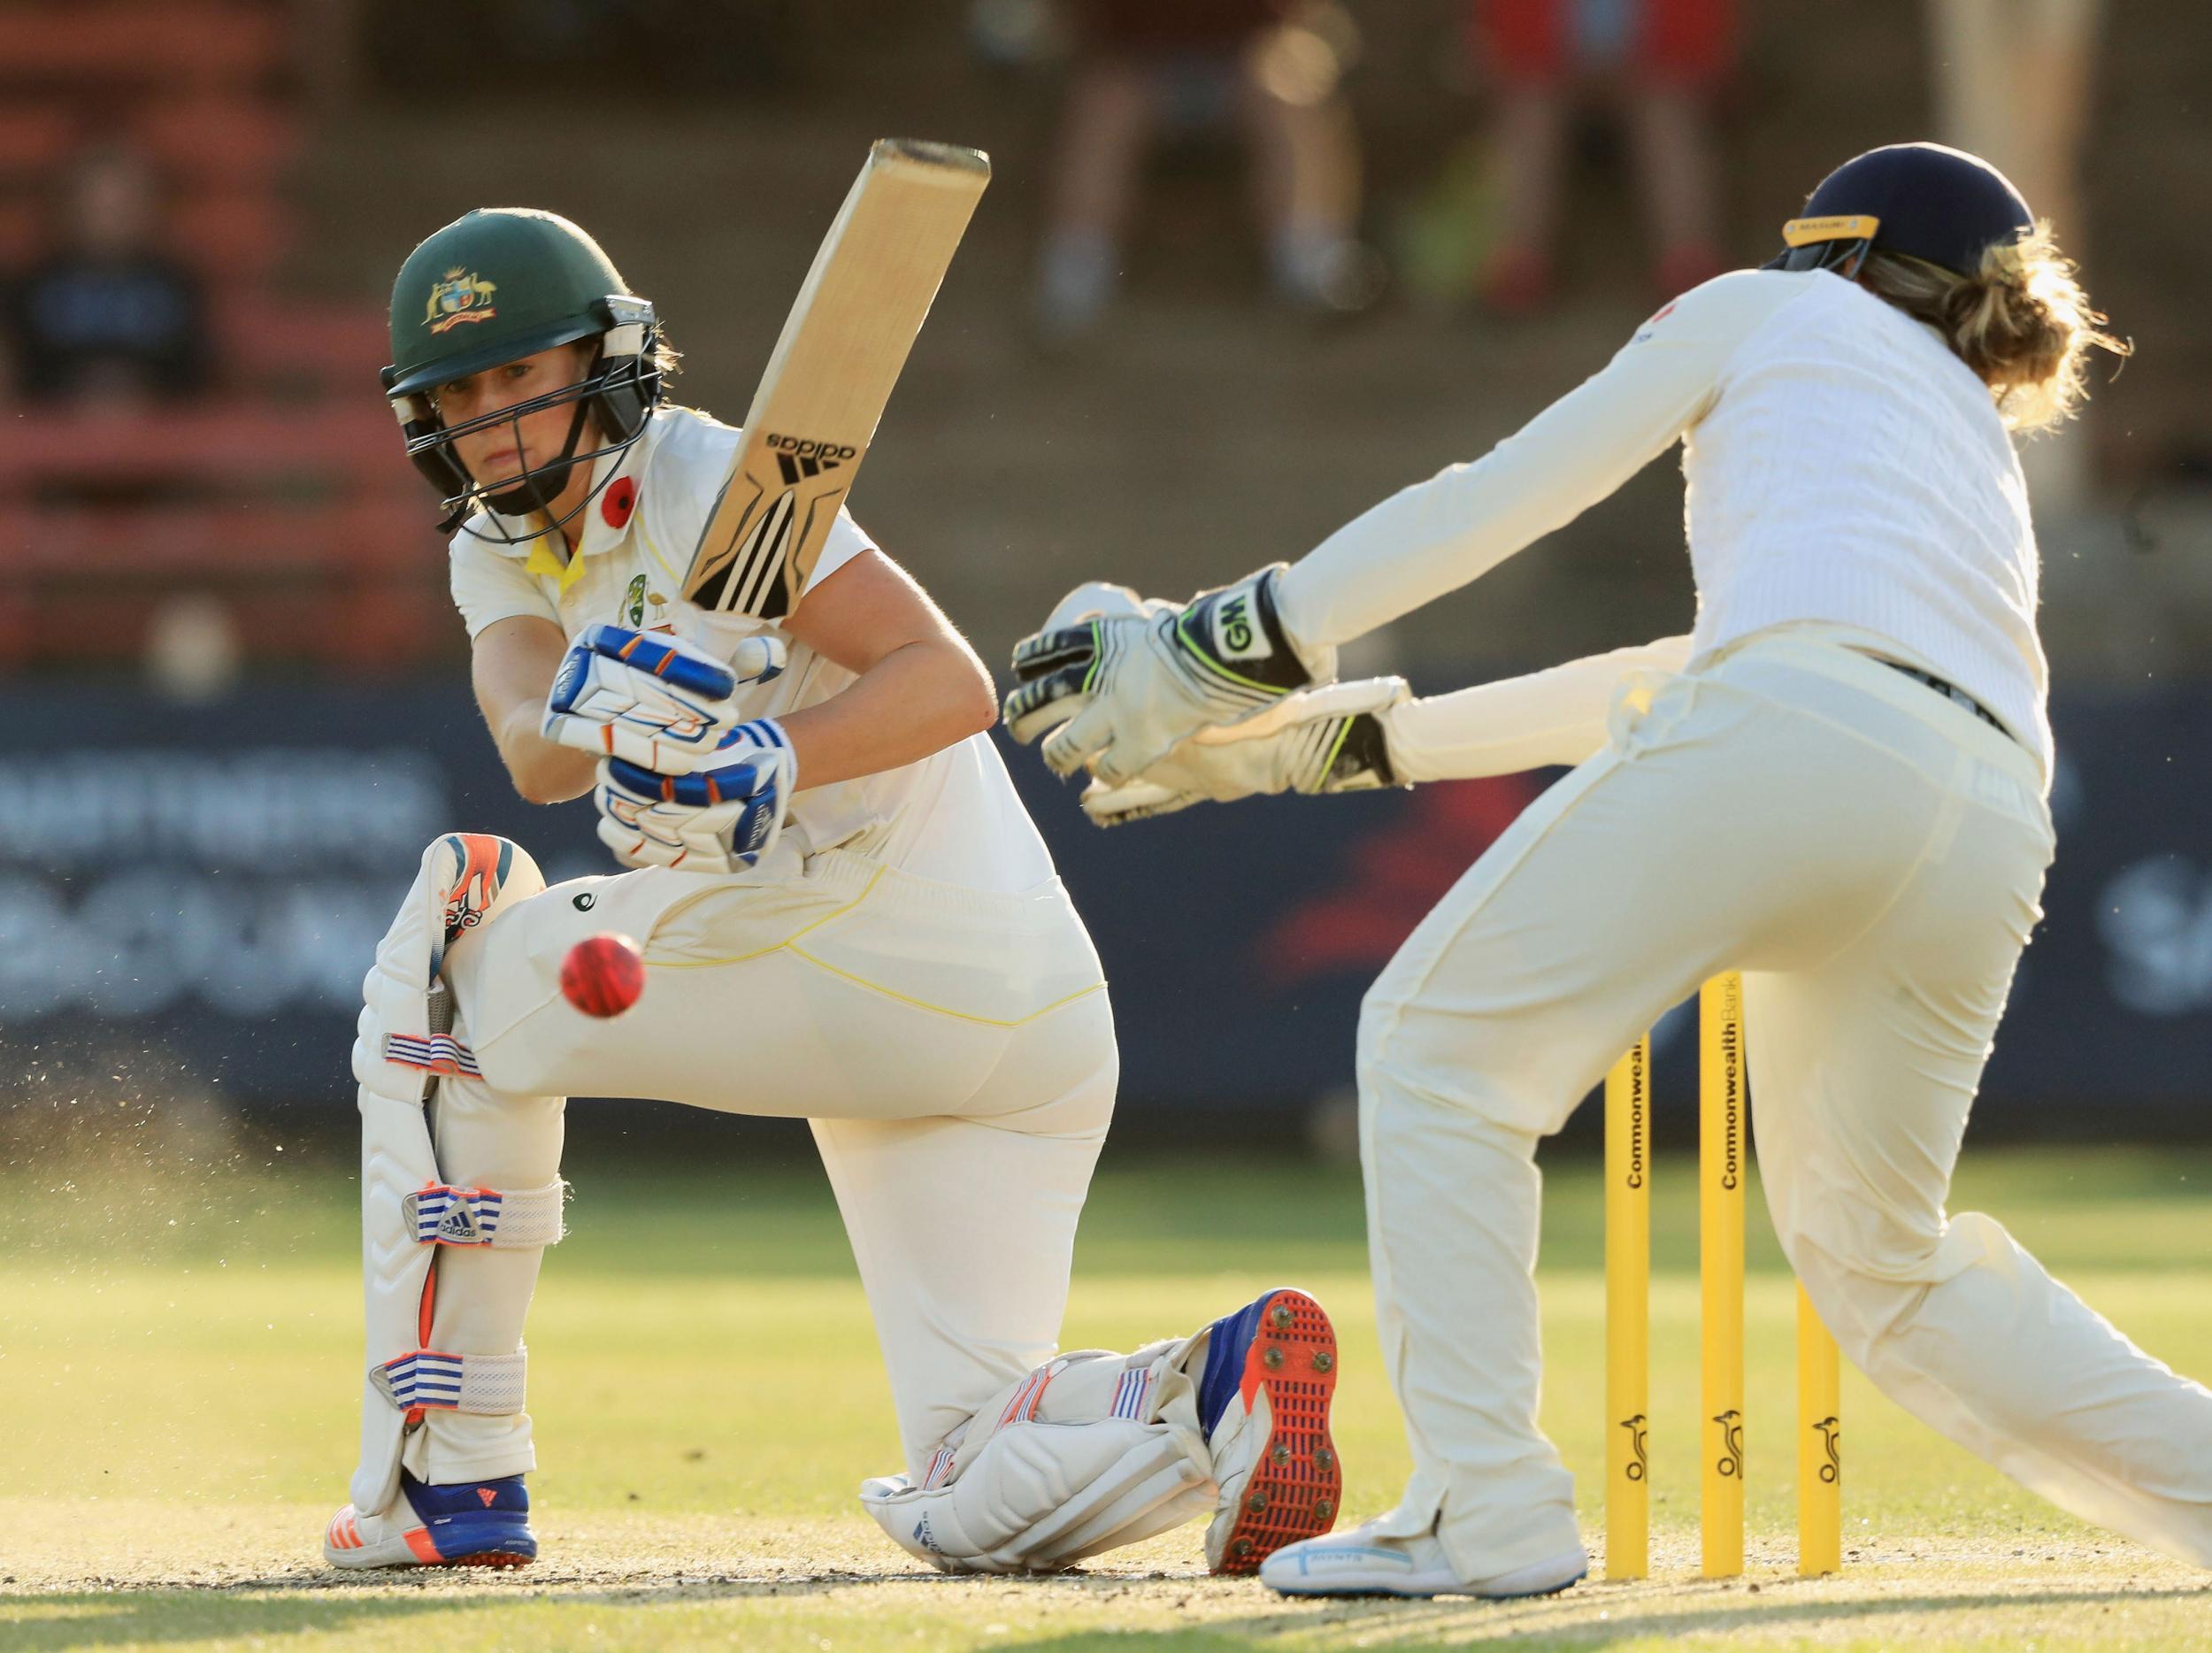 Perry's innings puts Australia firmly in control